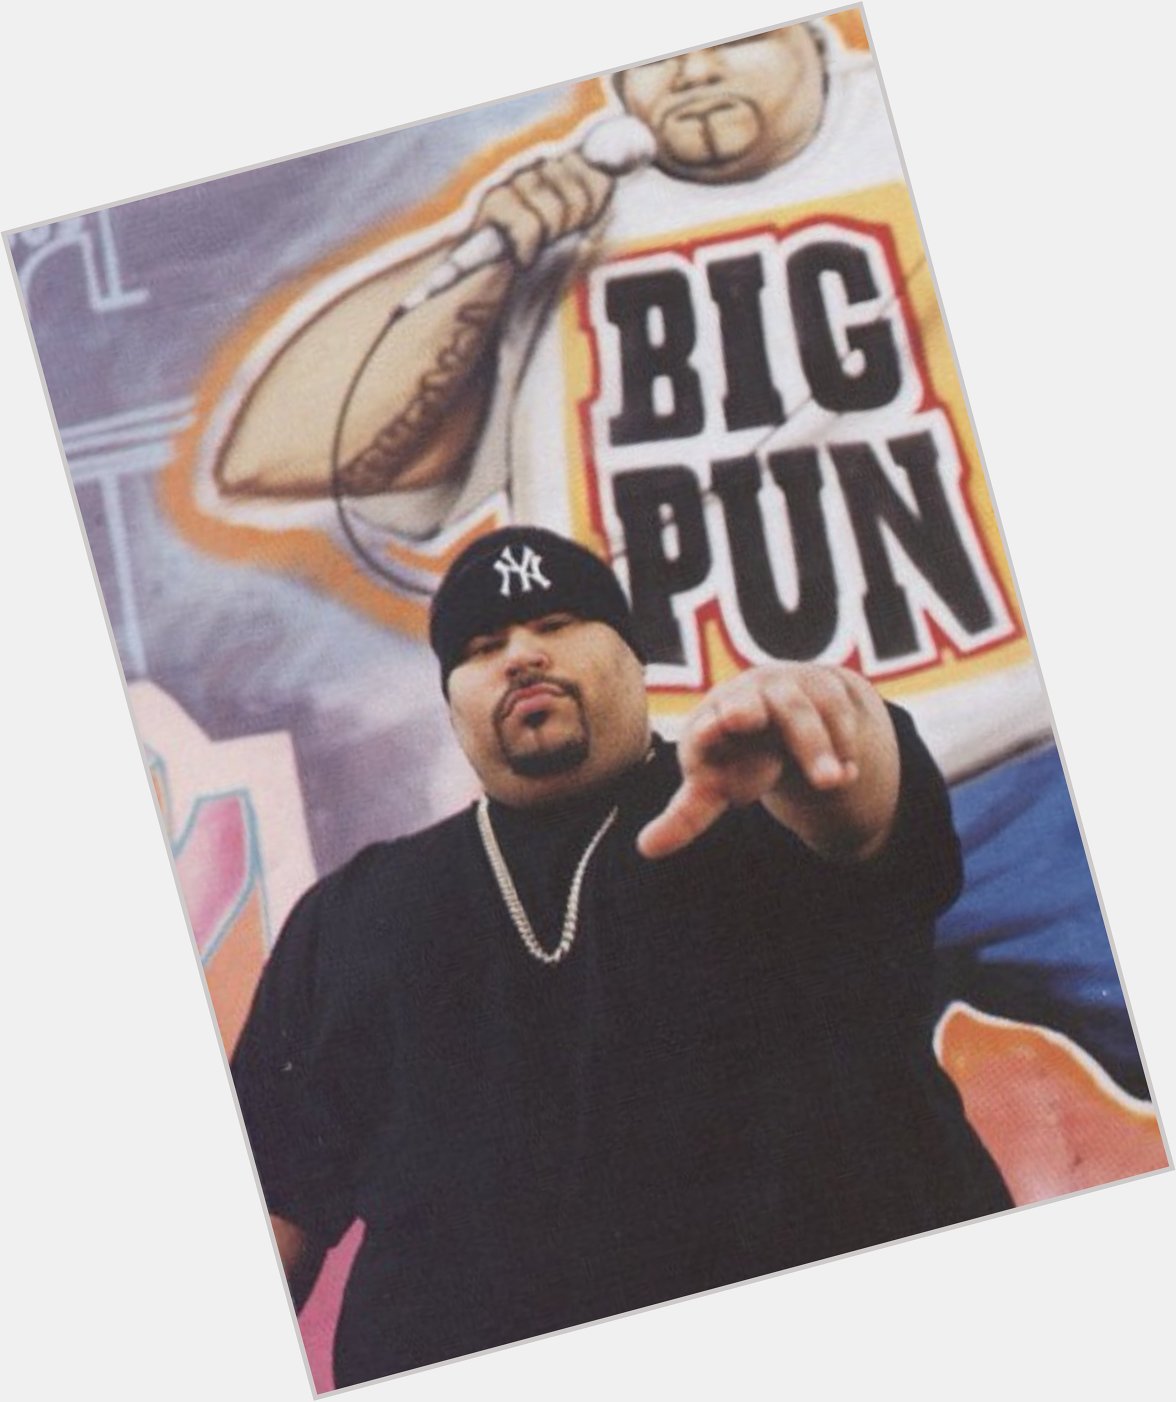 Happy 50th Birthday to the late great Christopher Rios aka Big Pun. One of the best to pick up a mic. 